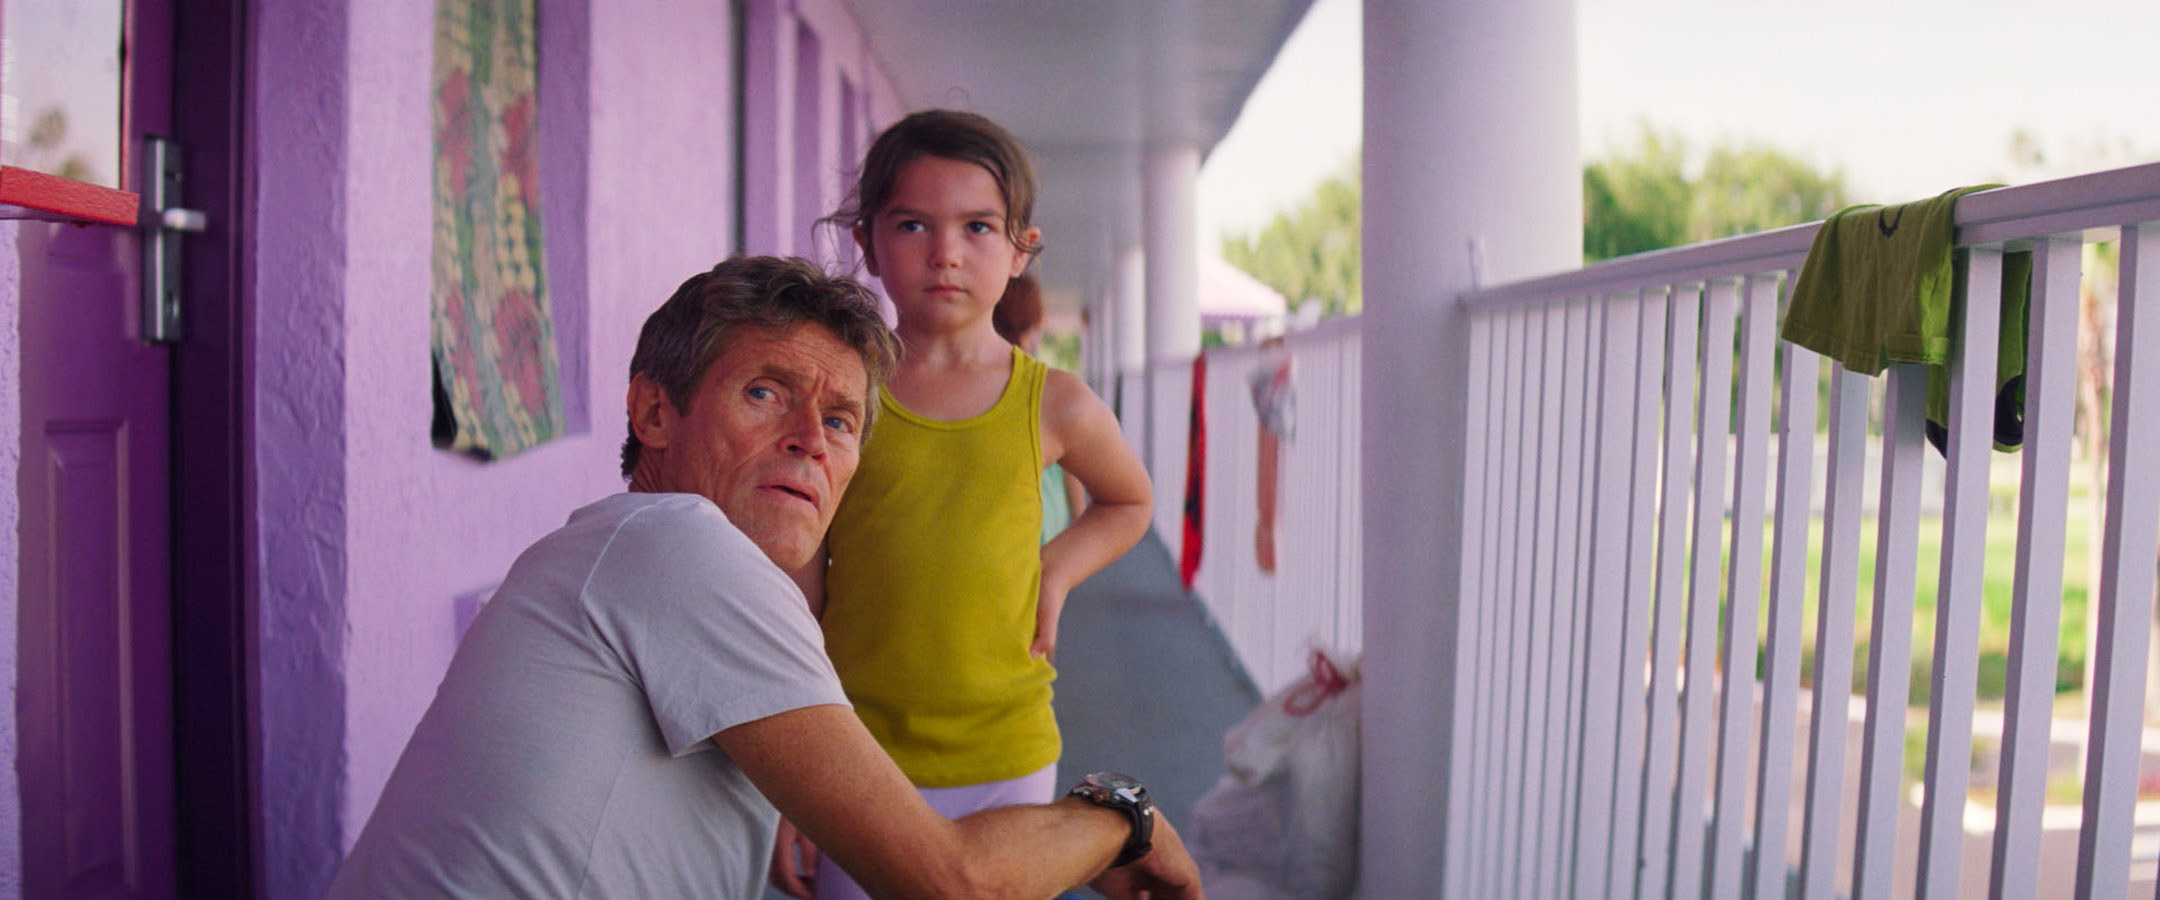 Willem Dafoe next to a little girl as he kneels on a balcony hallway in a scene from The Florida Project